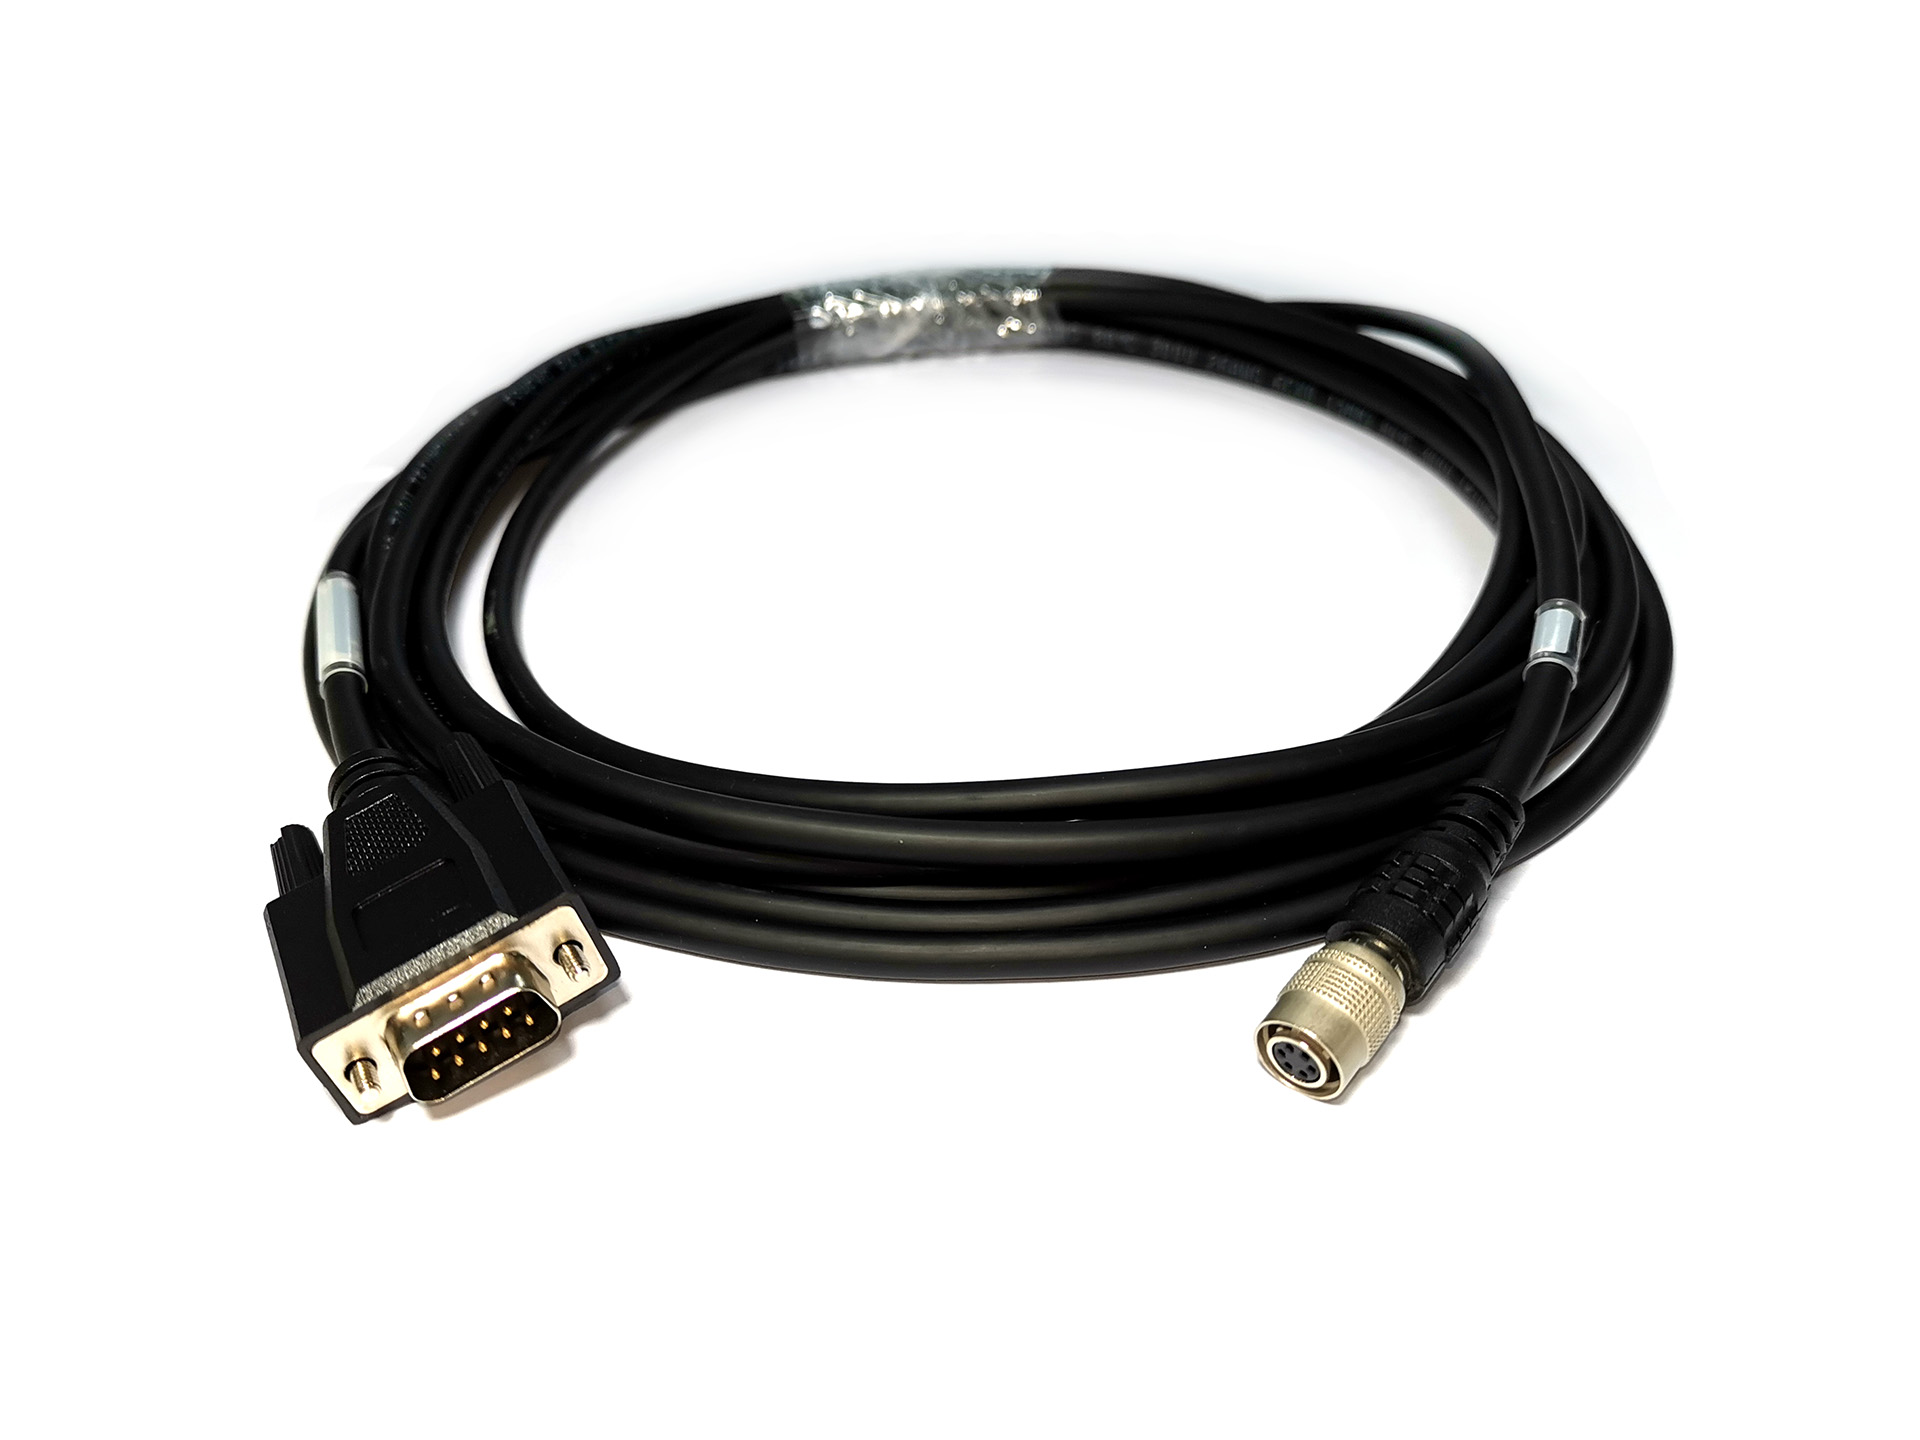 Cable masculino de 9 Pines hr10a – 7P – 6s a db9 / RS232